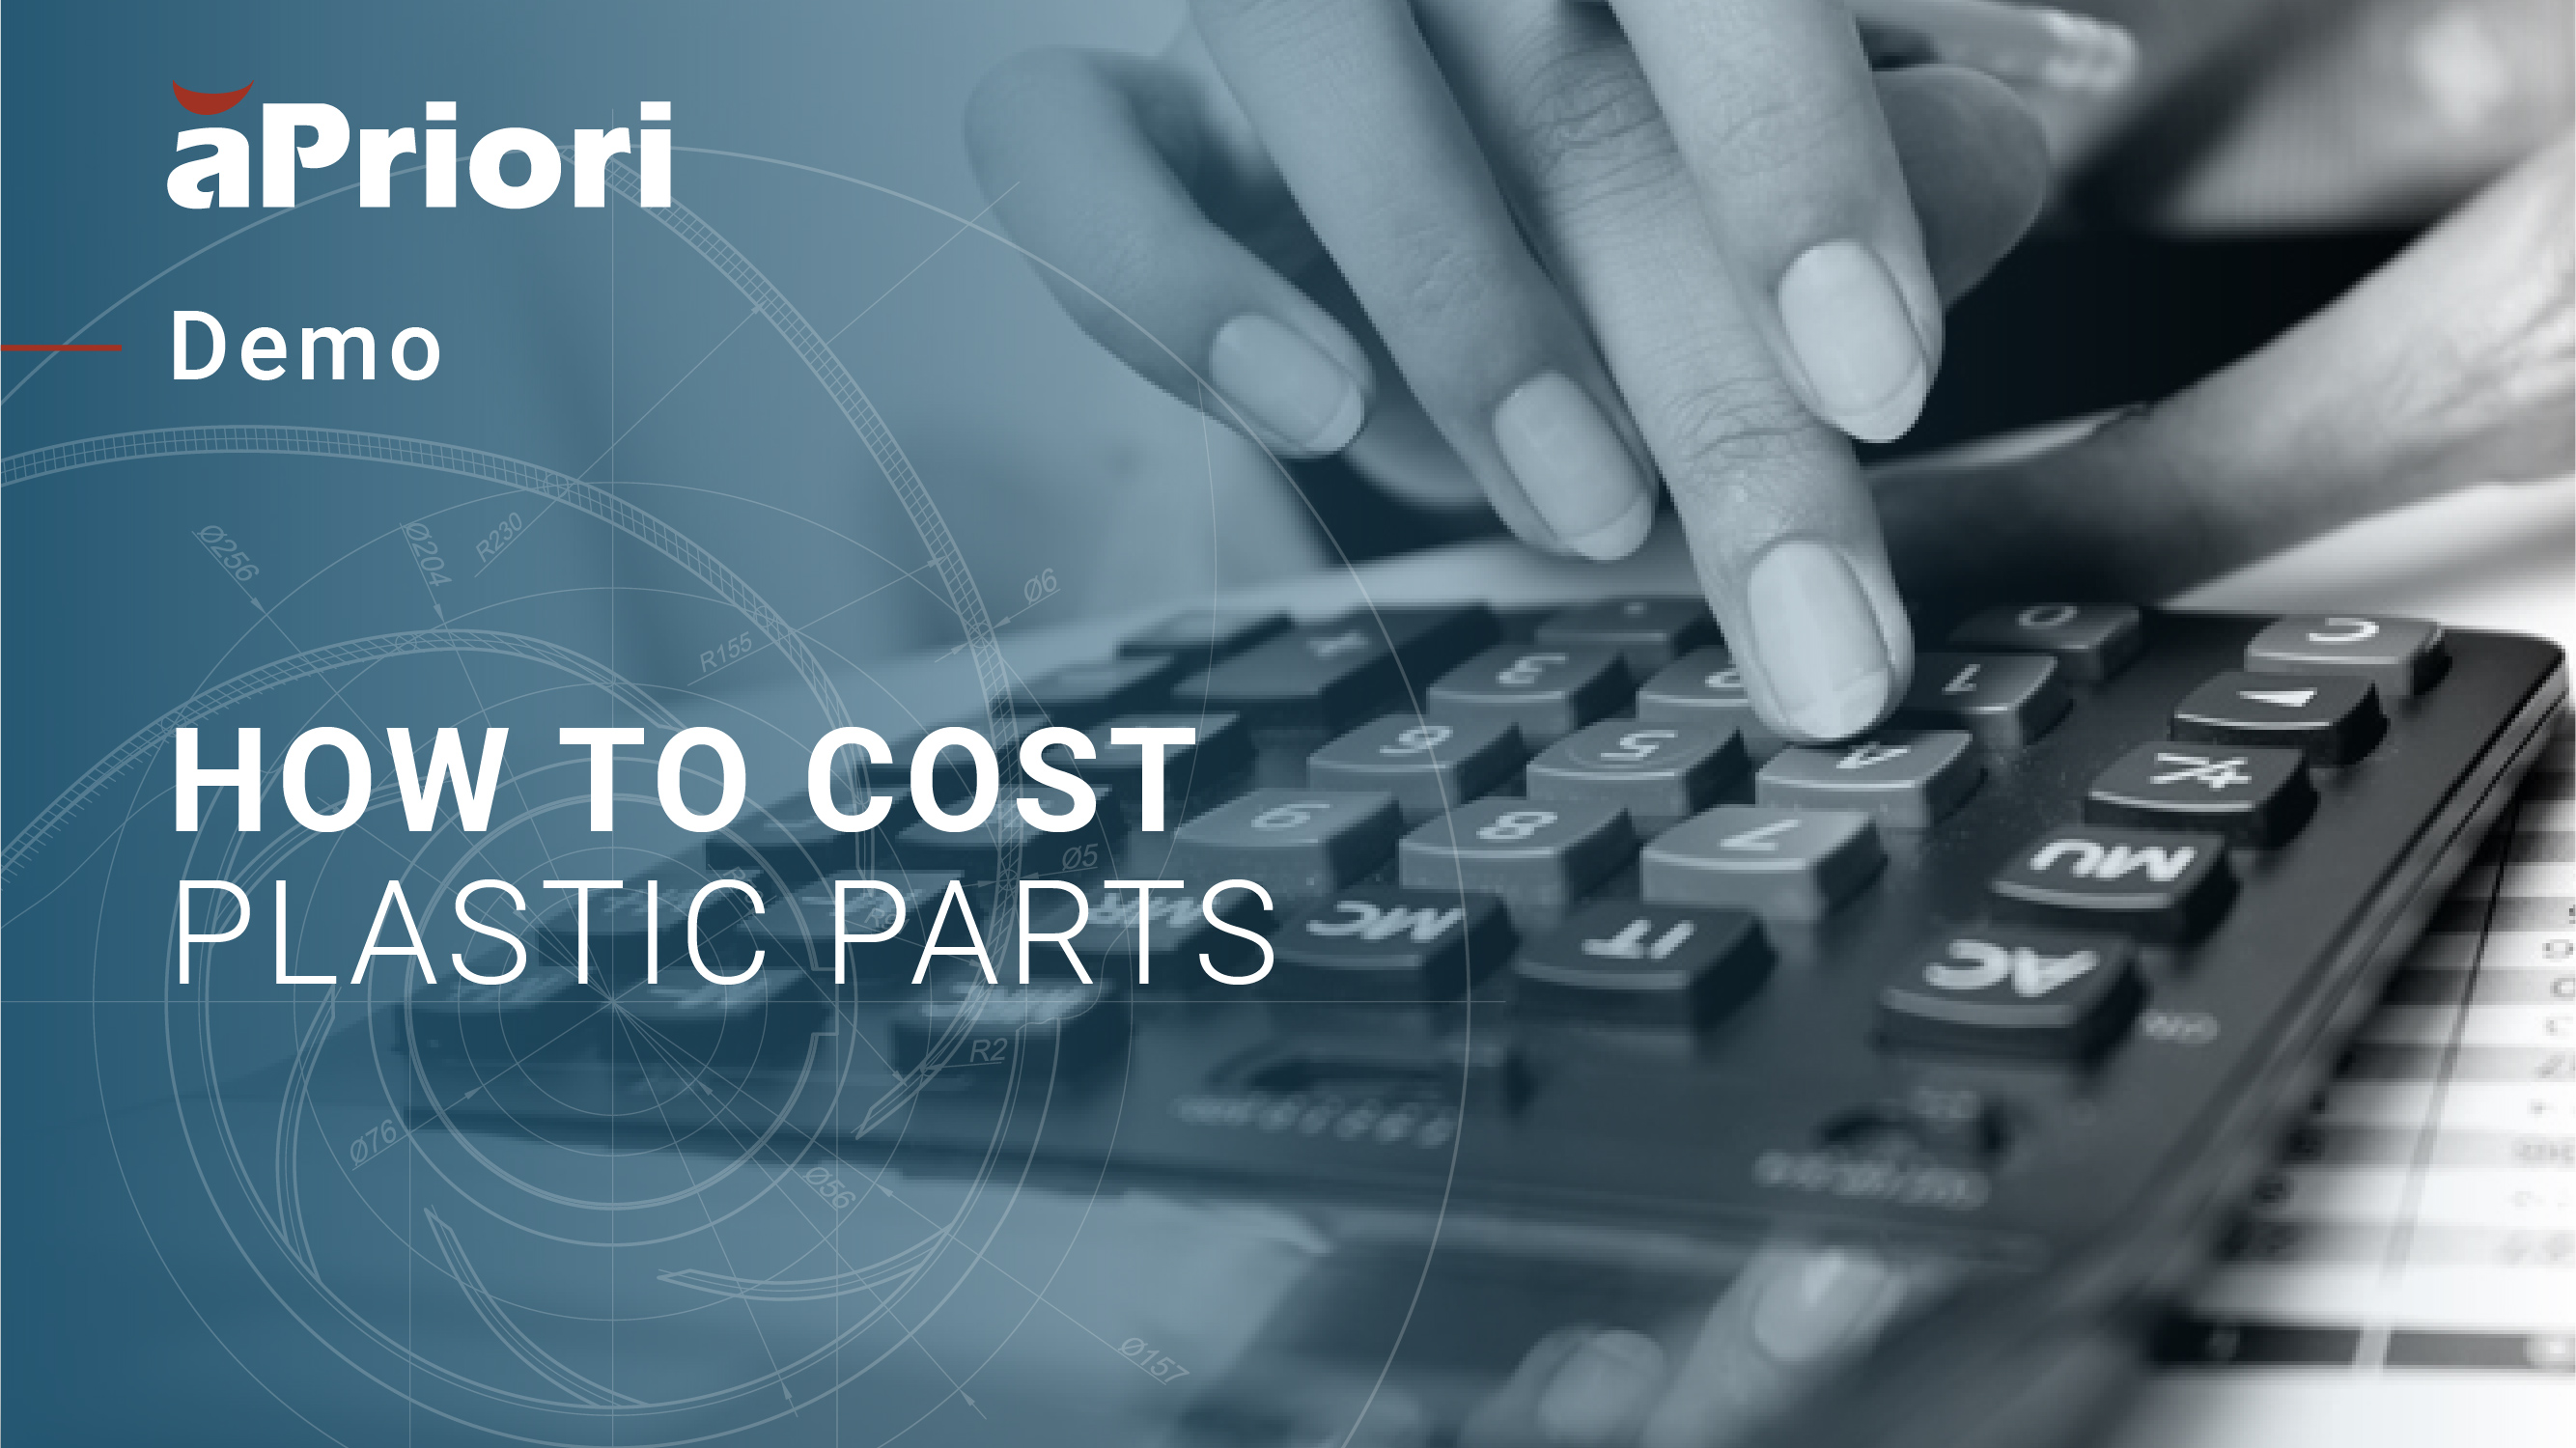 Demonstration of Complete Costing of Complex Plastic Assemblies in aPriori